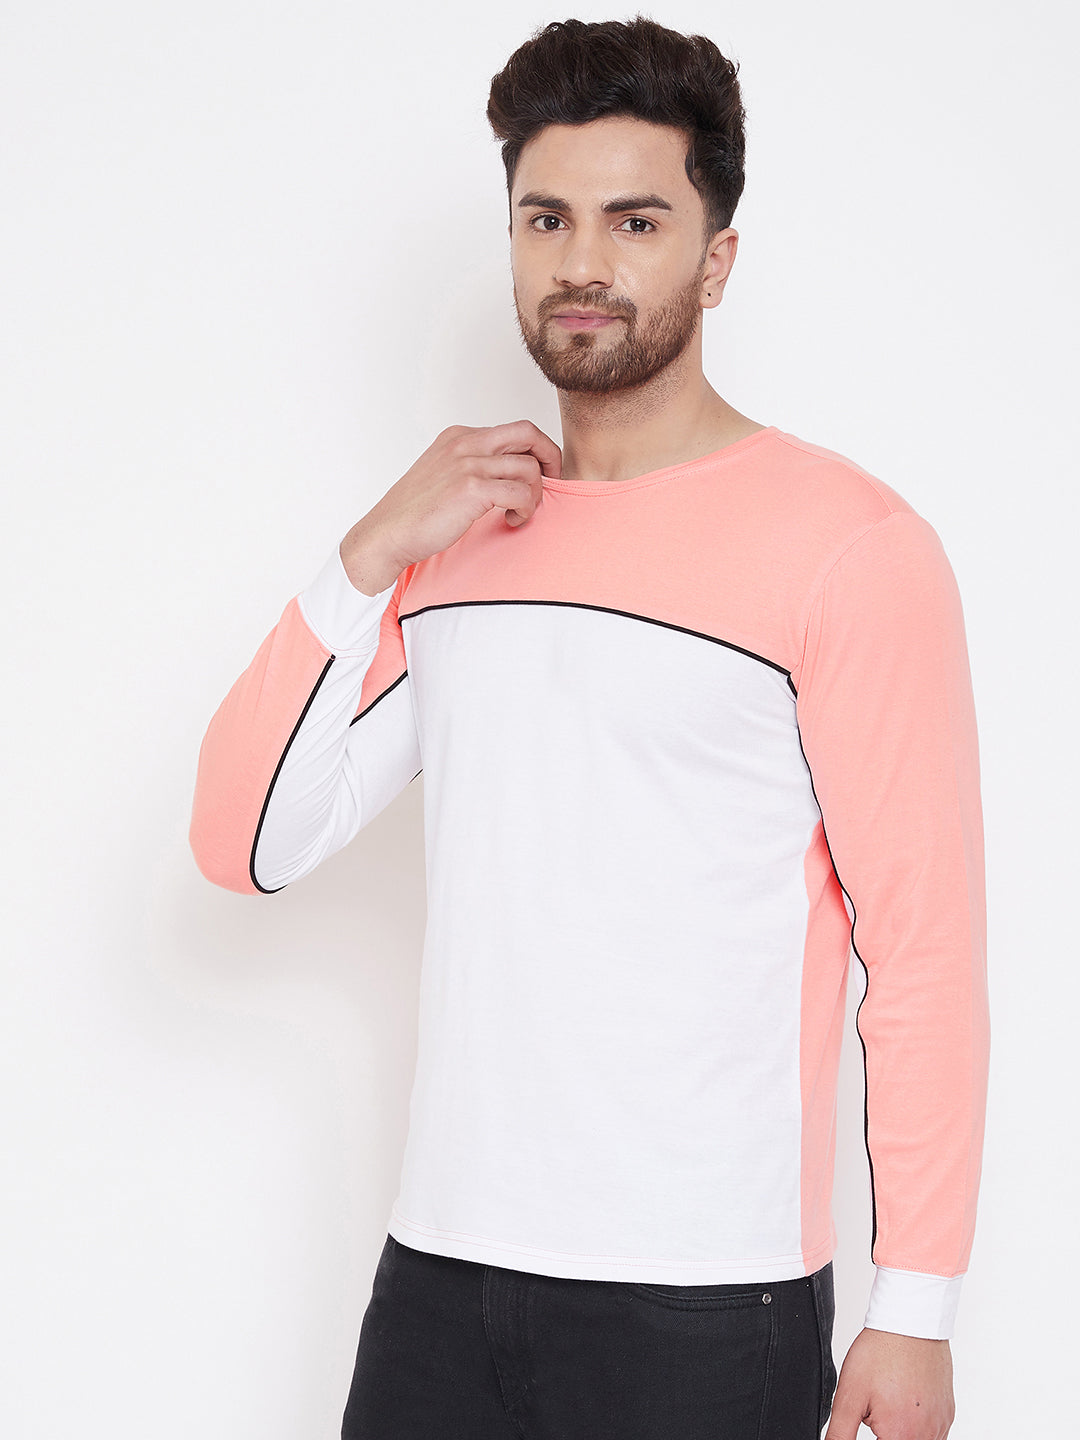 Coral/Black/White Color Block Men's Full Sleeves Round Neck T-Shirt